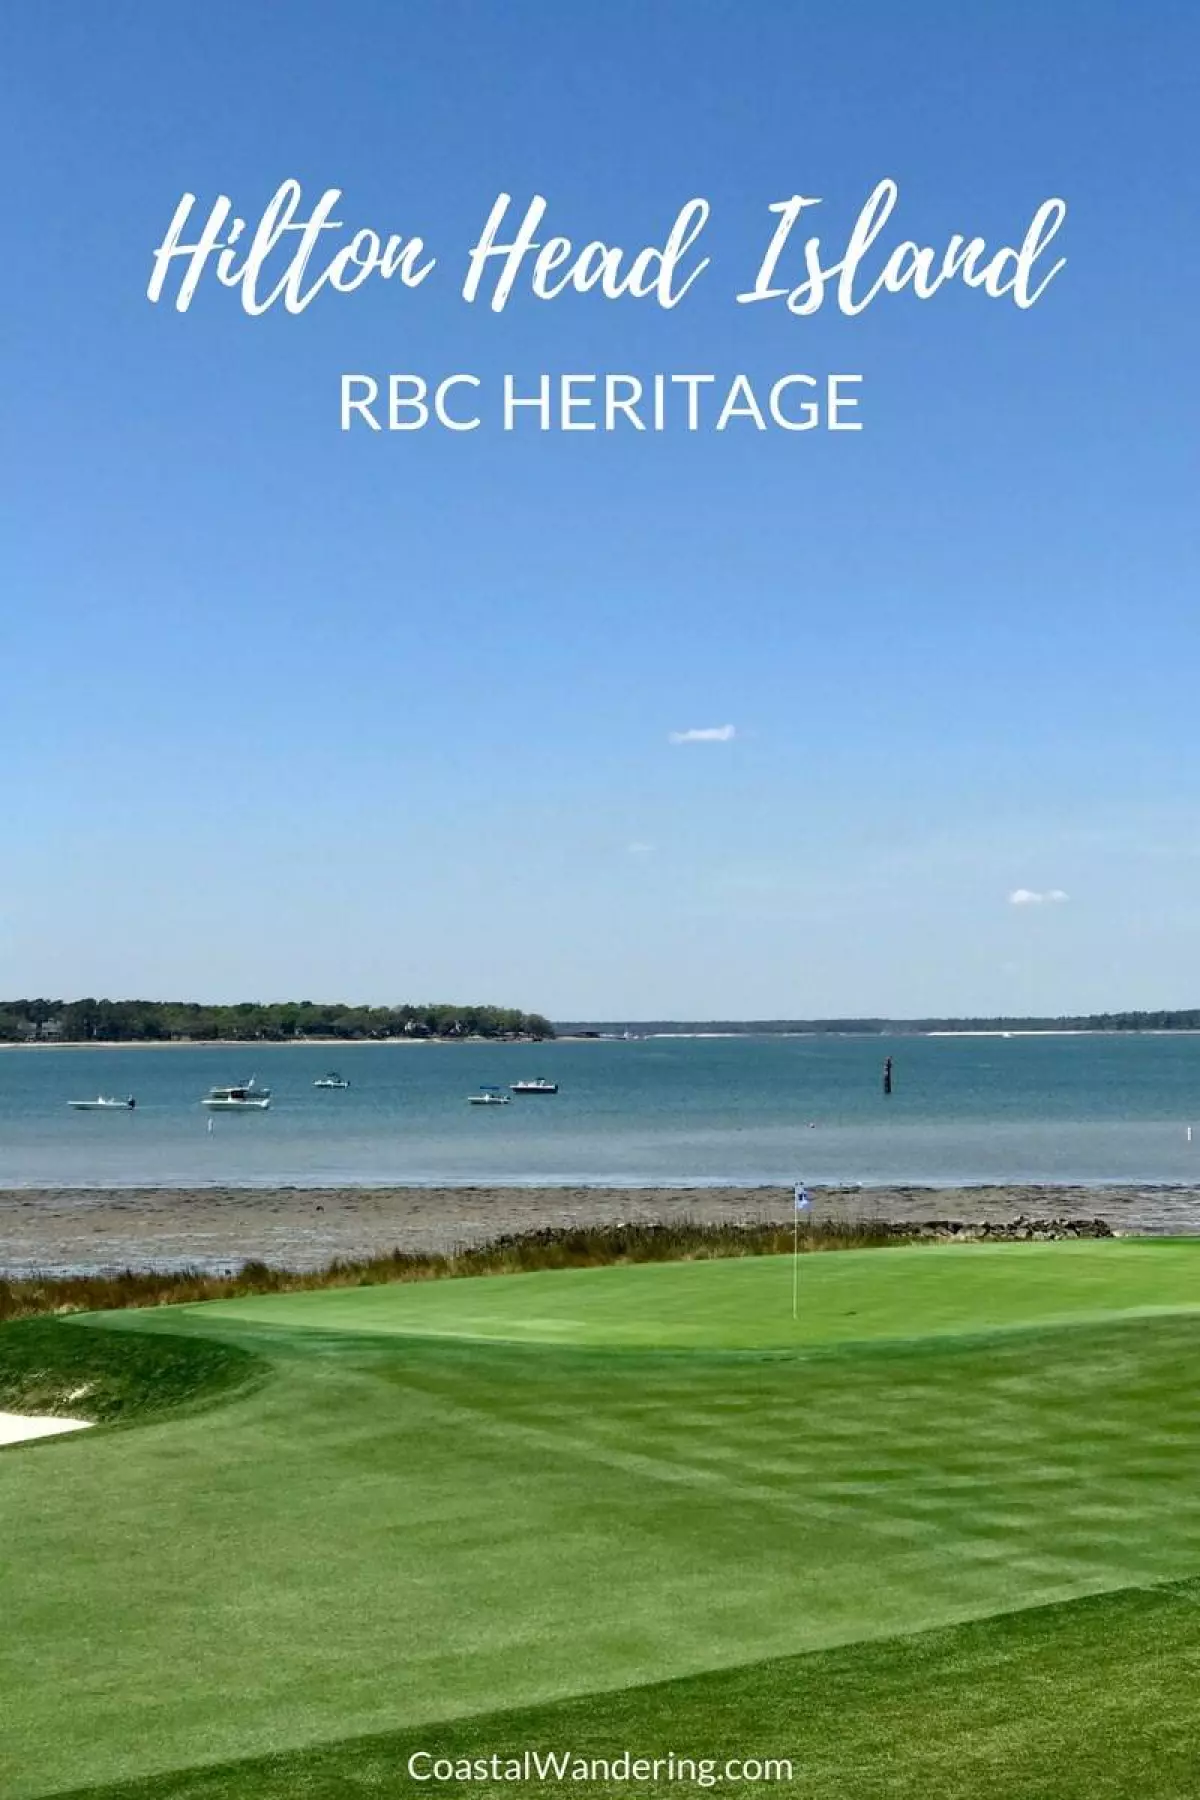 Hilton Head Island RBC Heritage PGA Golf Tournament view from the 18th green at Harbour Town Golf Links